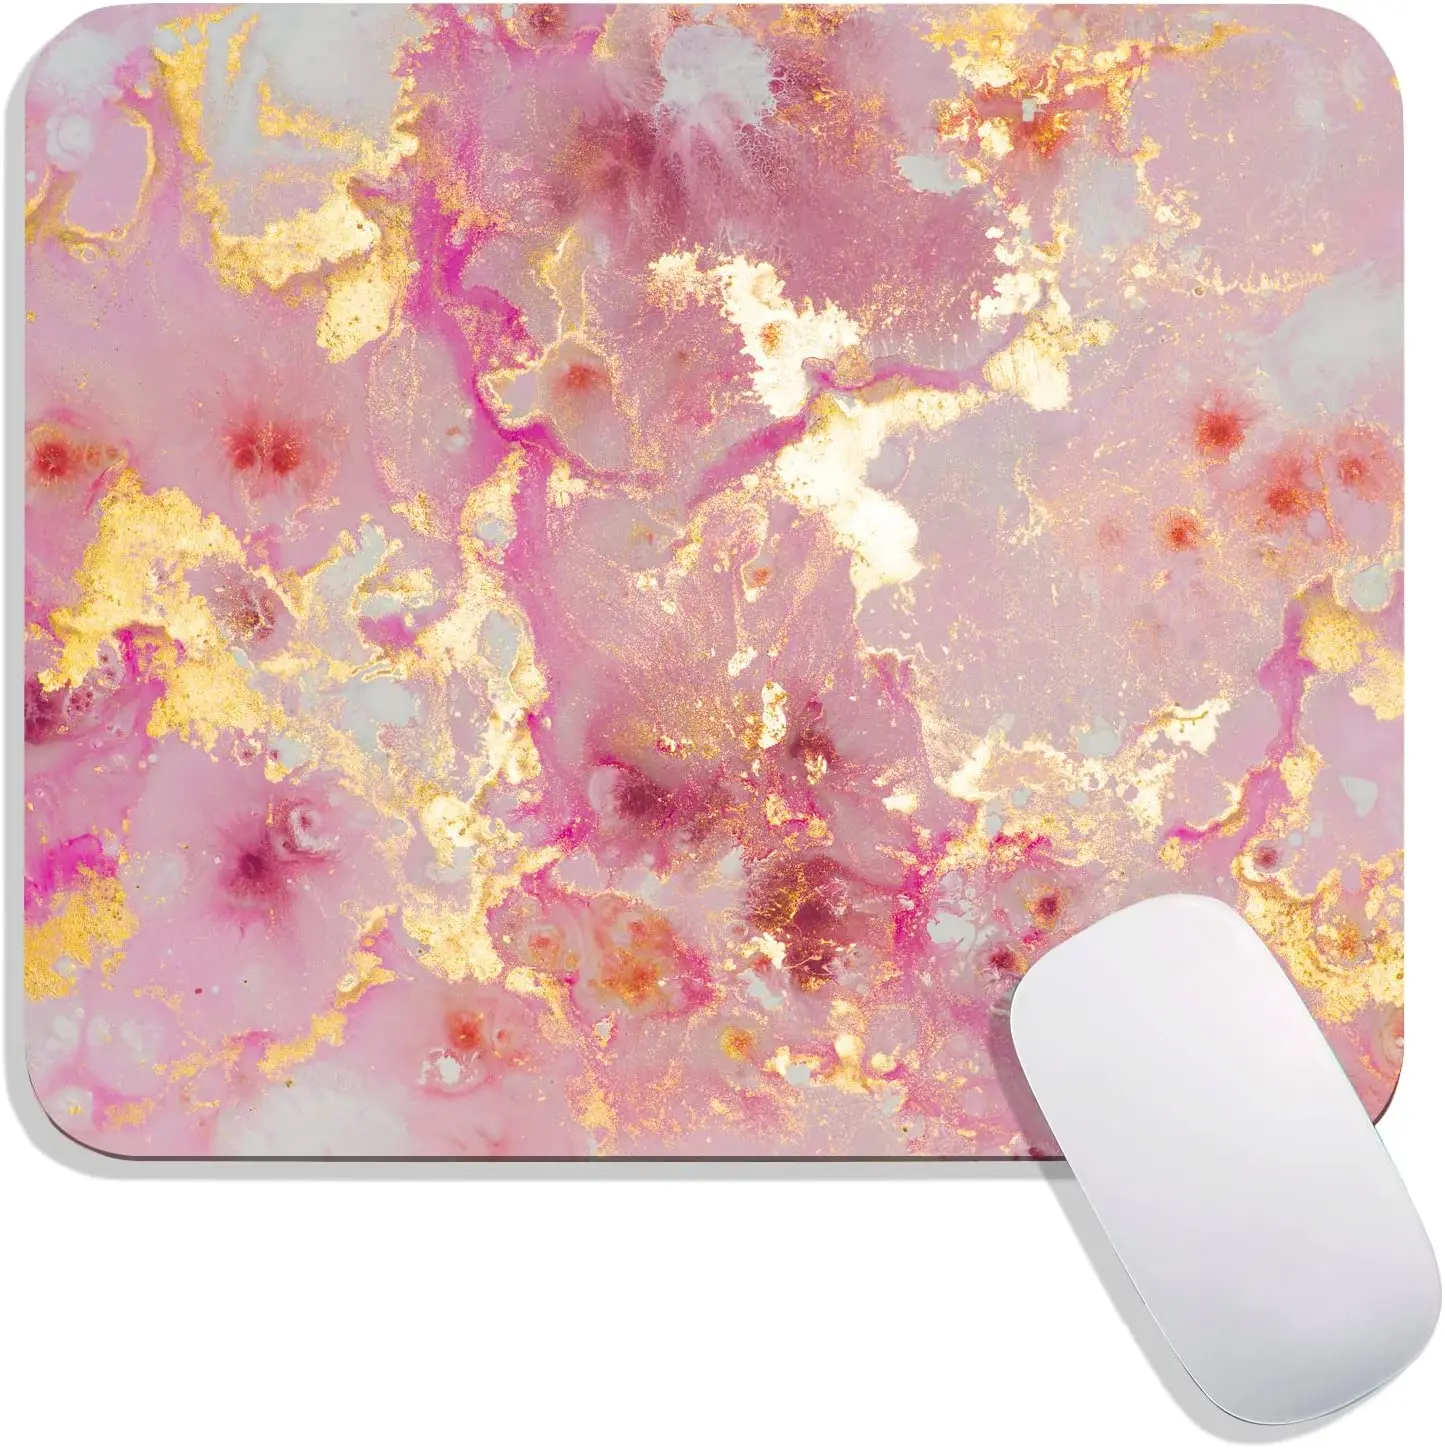 

Pink Gold Marble Mouse Pad Personalized Premium-Textured Mousepads Design Non-Slip Rubber Base Computer Mouse Pads 9.7x7.9 In